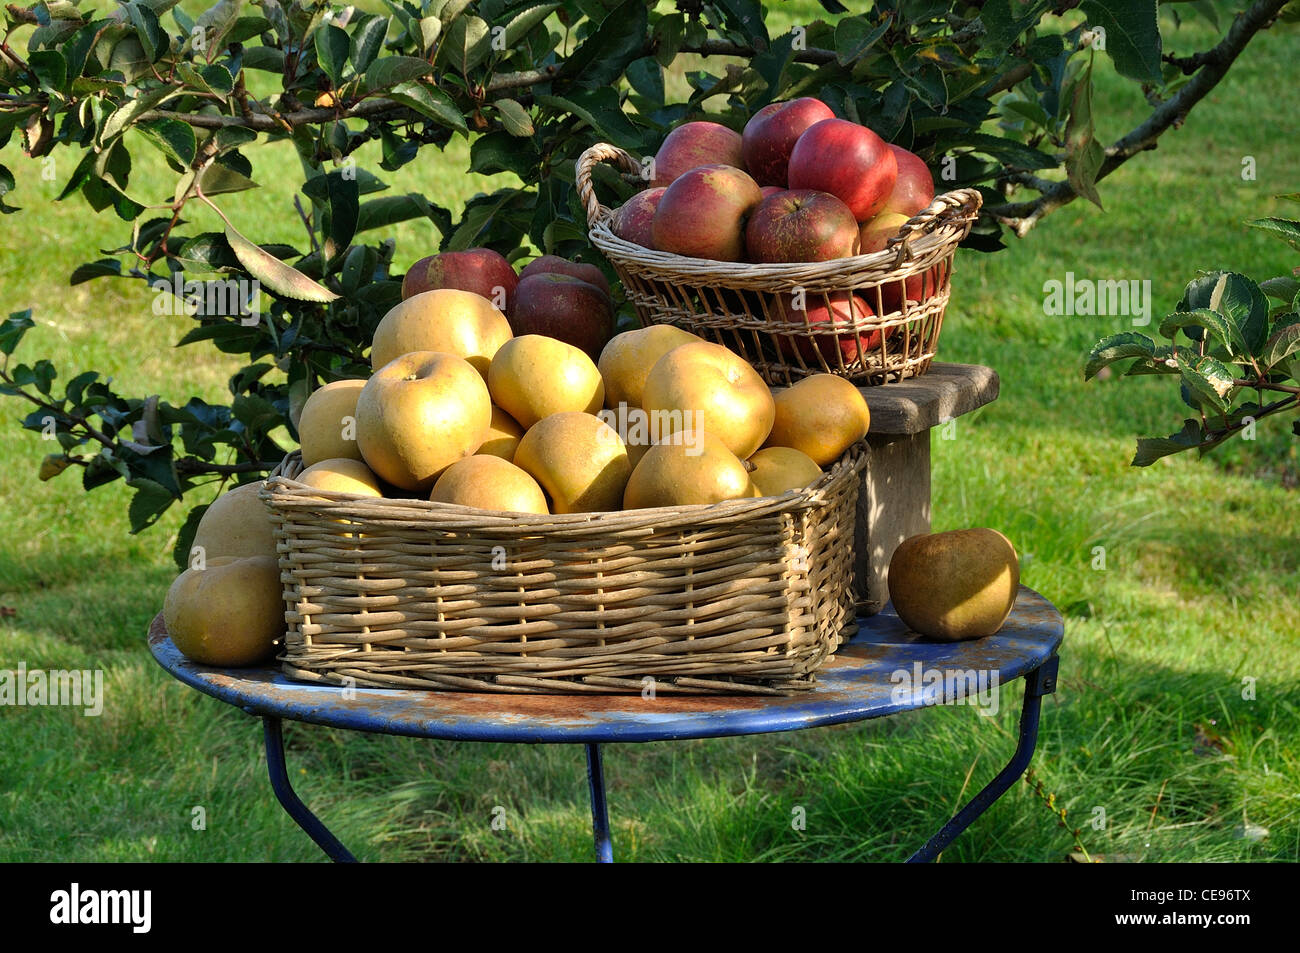 Russet (Reinette Grise du Canada) and Melrose apples (Malus domestica) in a basket on the garden table. Stock Photo